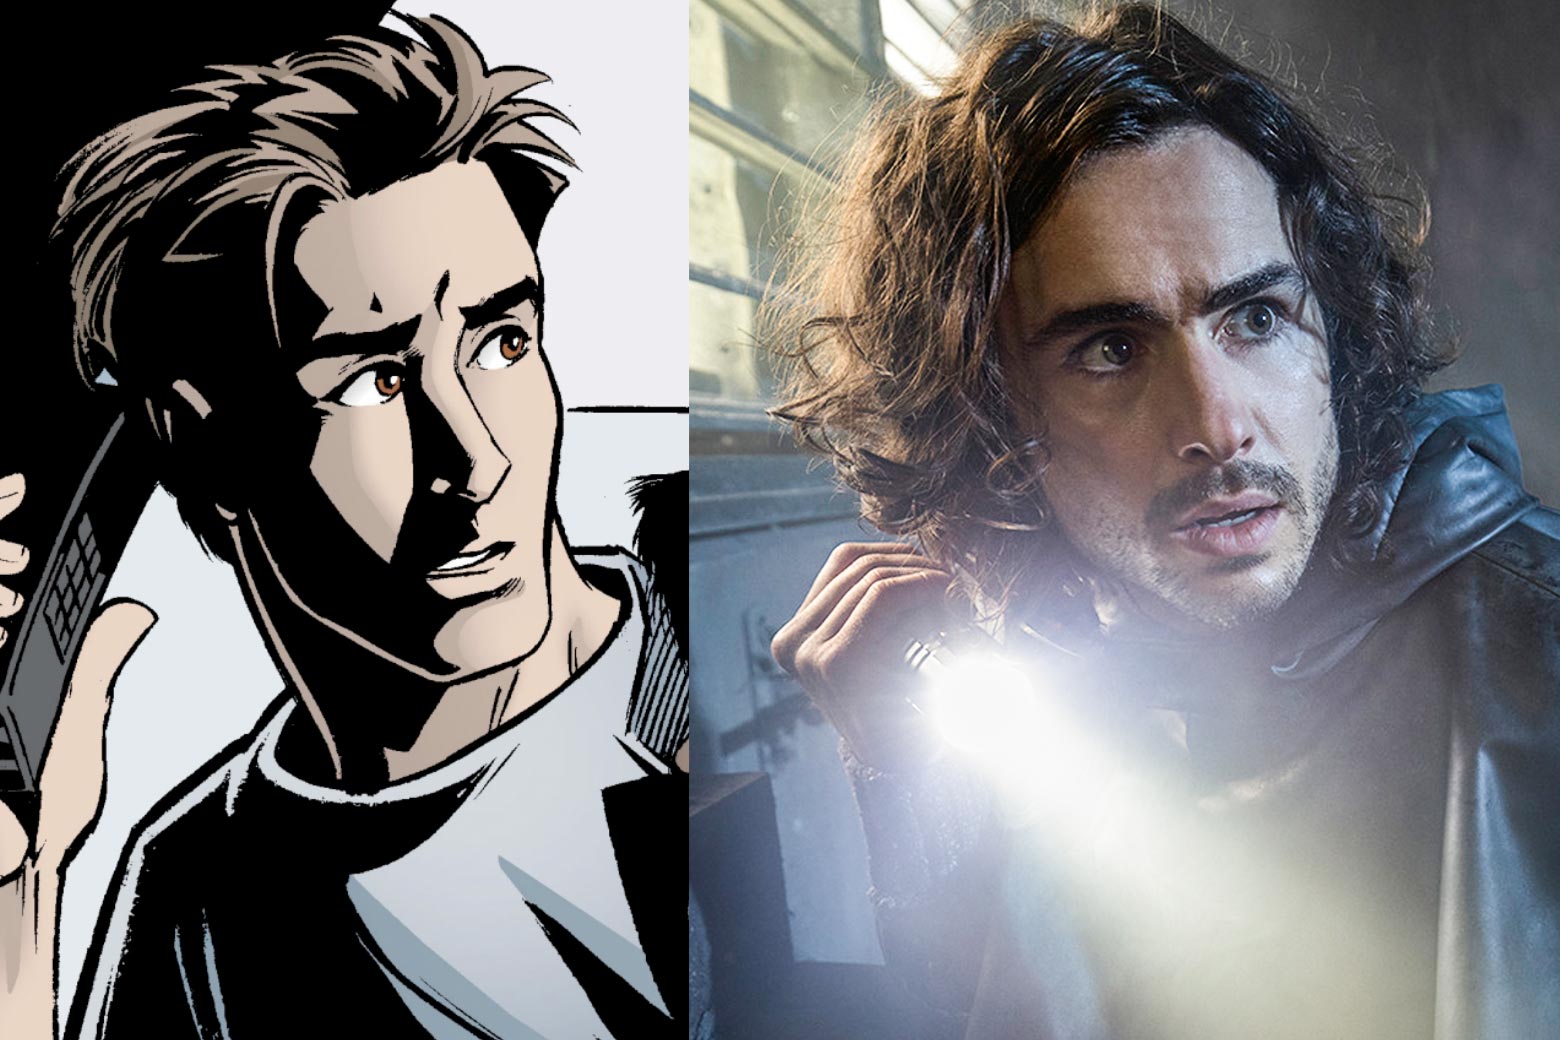 Side-by-side images of Yorick in the comic and Ben Schnetzer as Yorick in the TV show